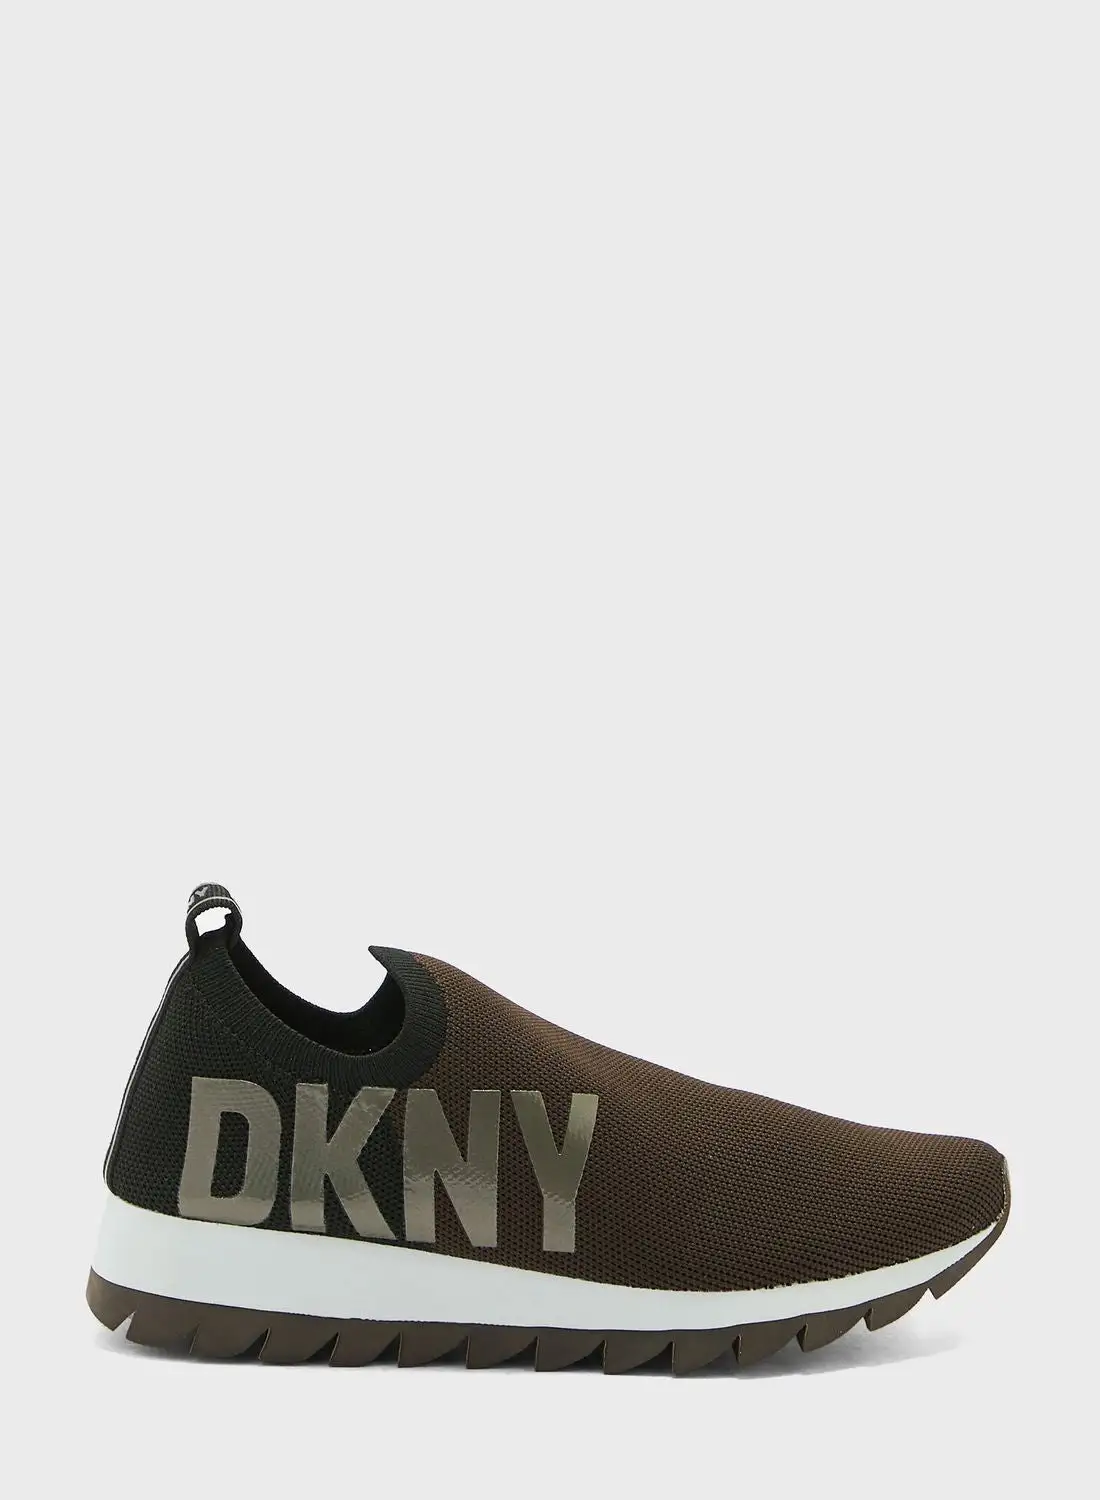 DKNY Azer  Low Top Sneakers